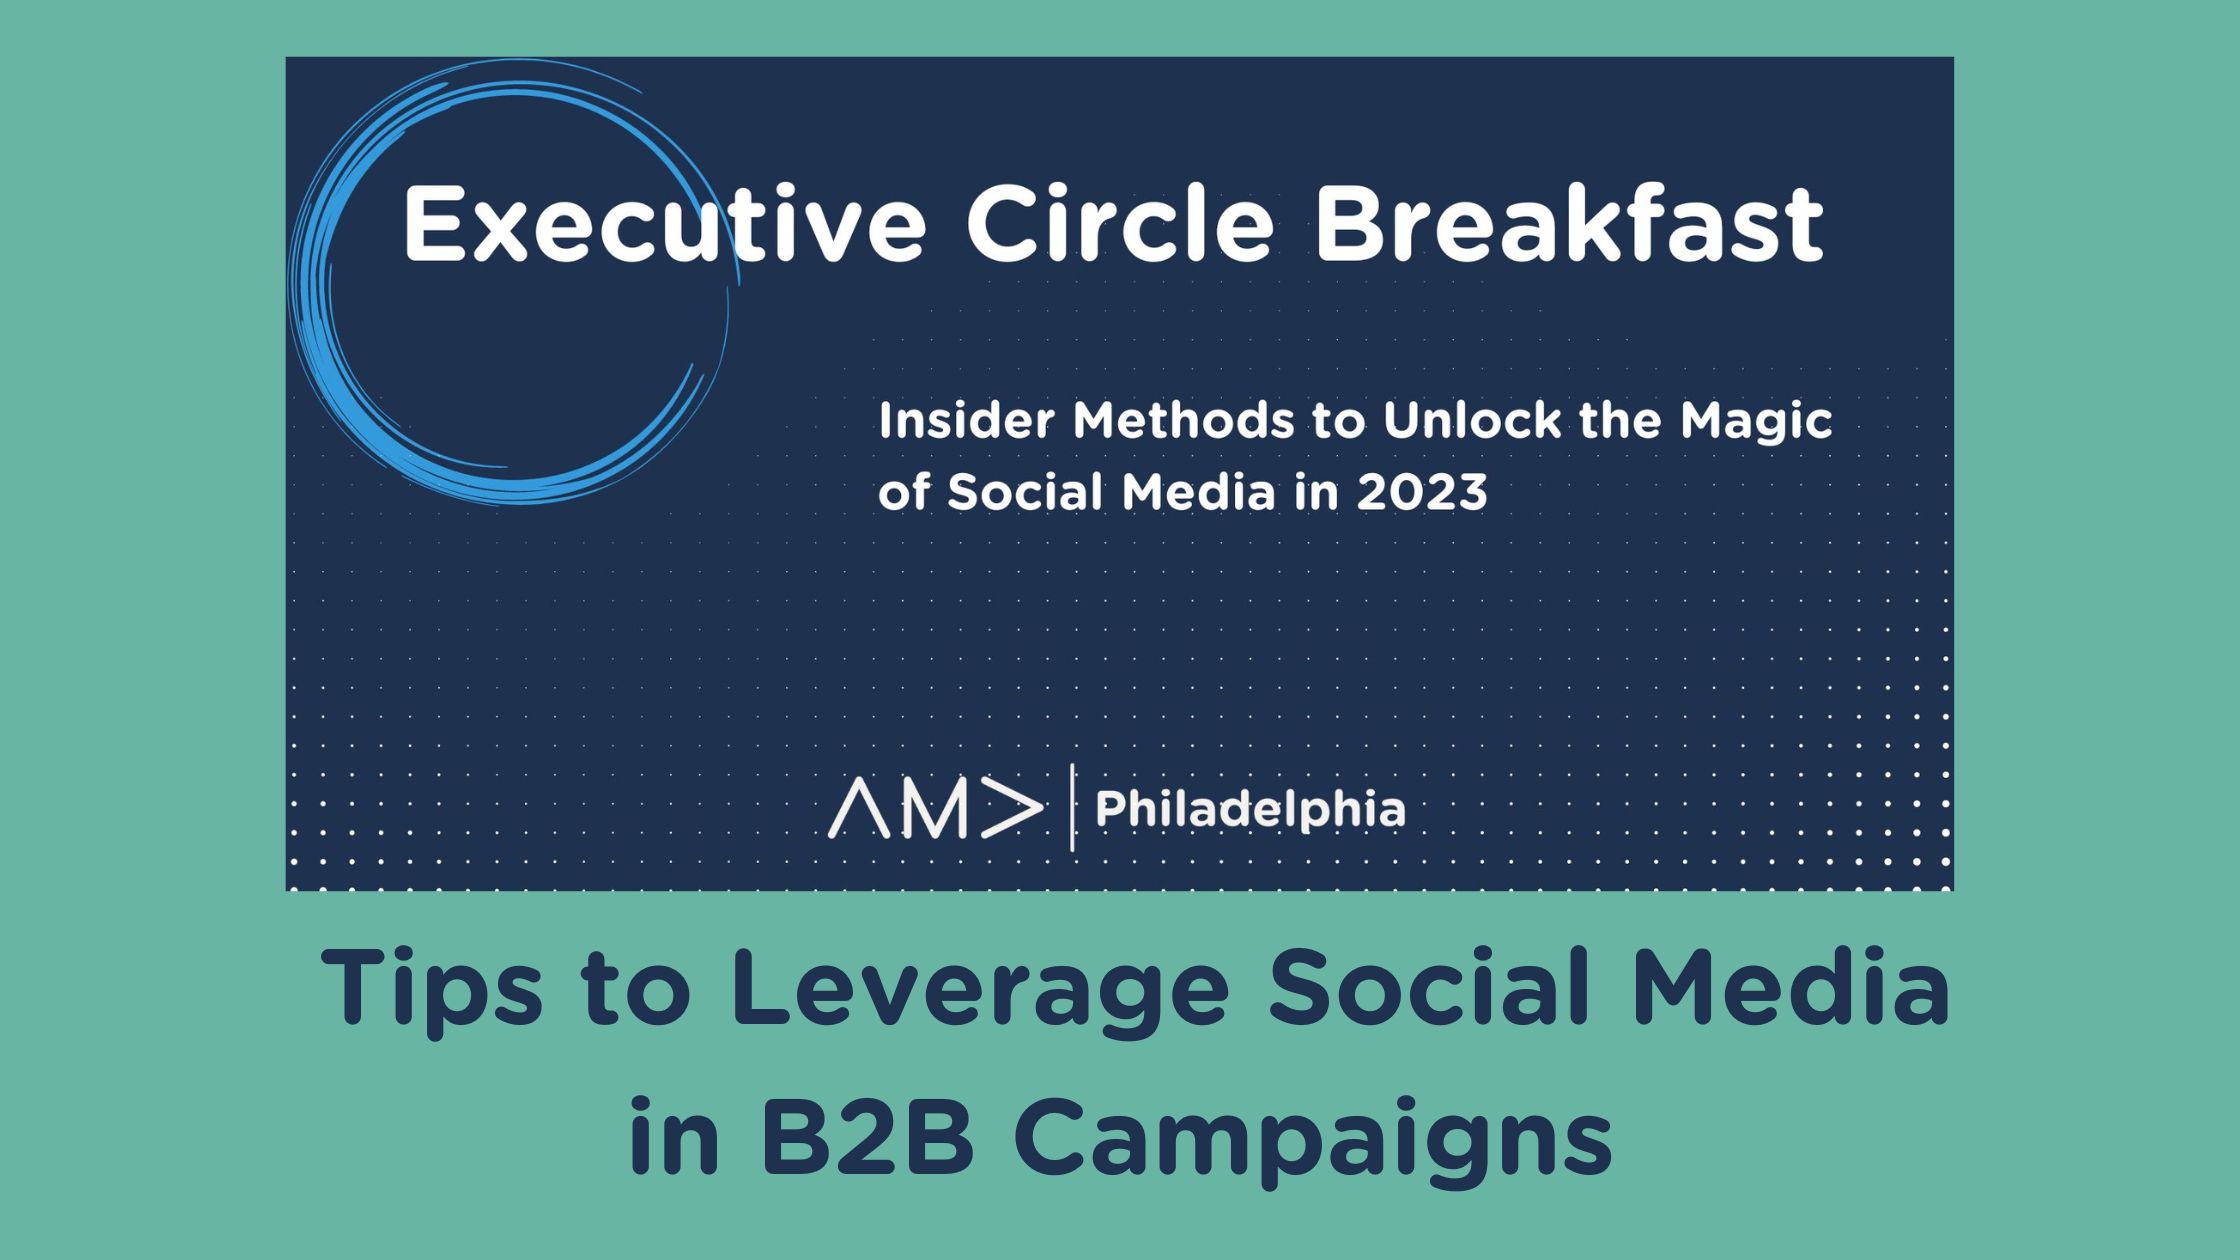 Tips to Leverage Social Media in B2B Campaigns